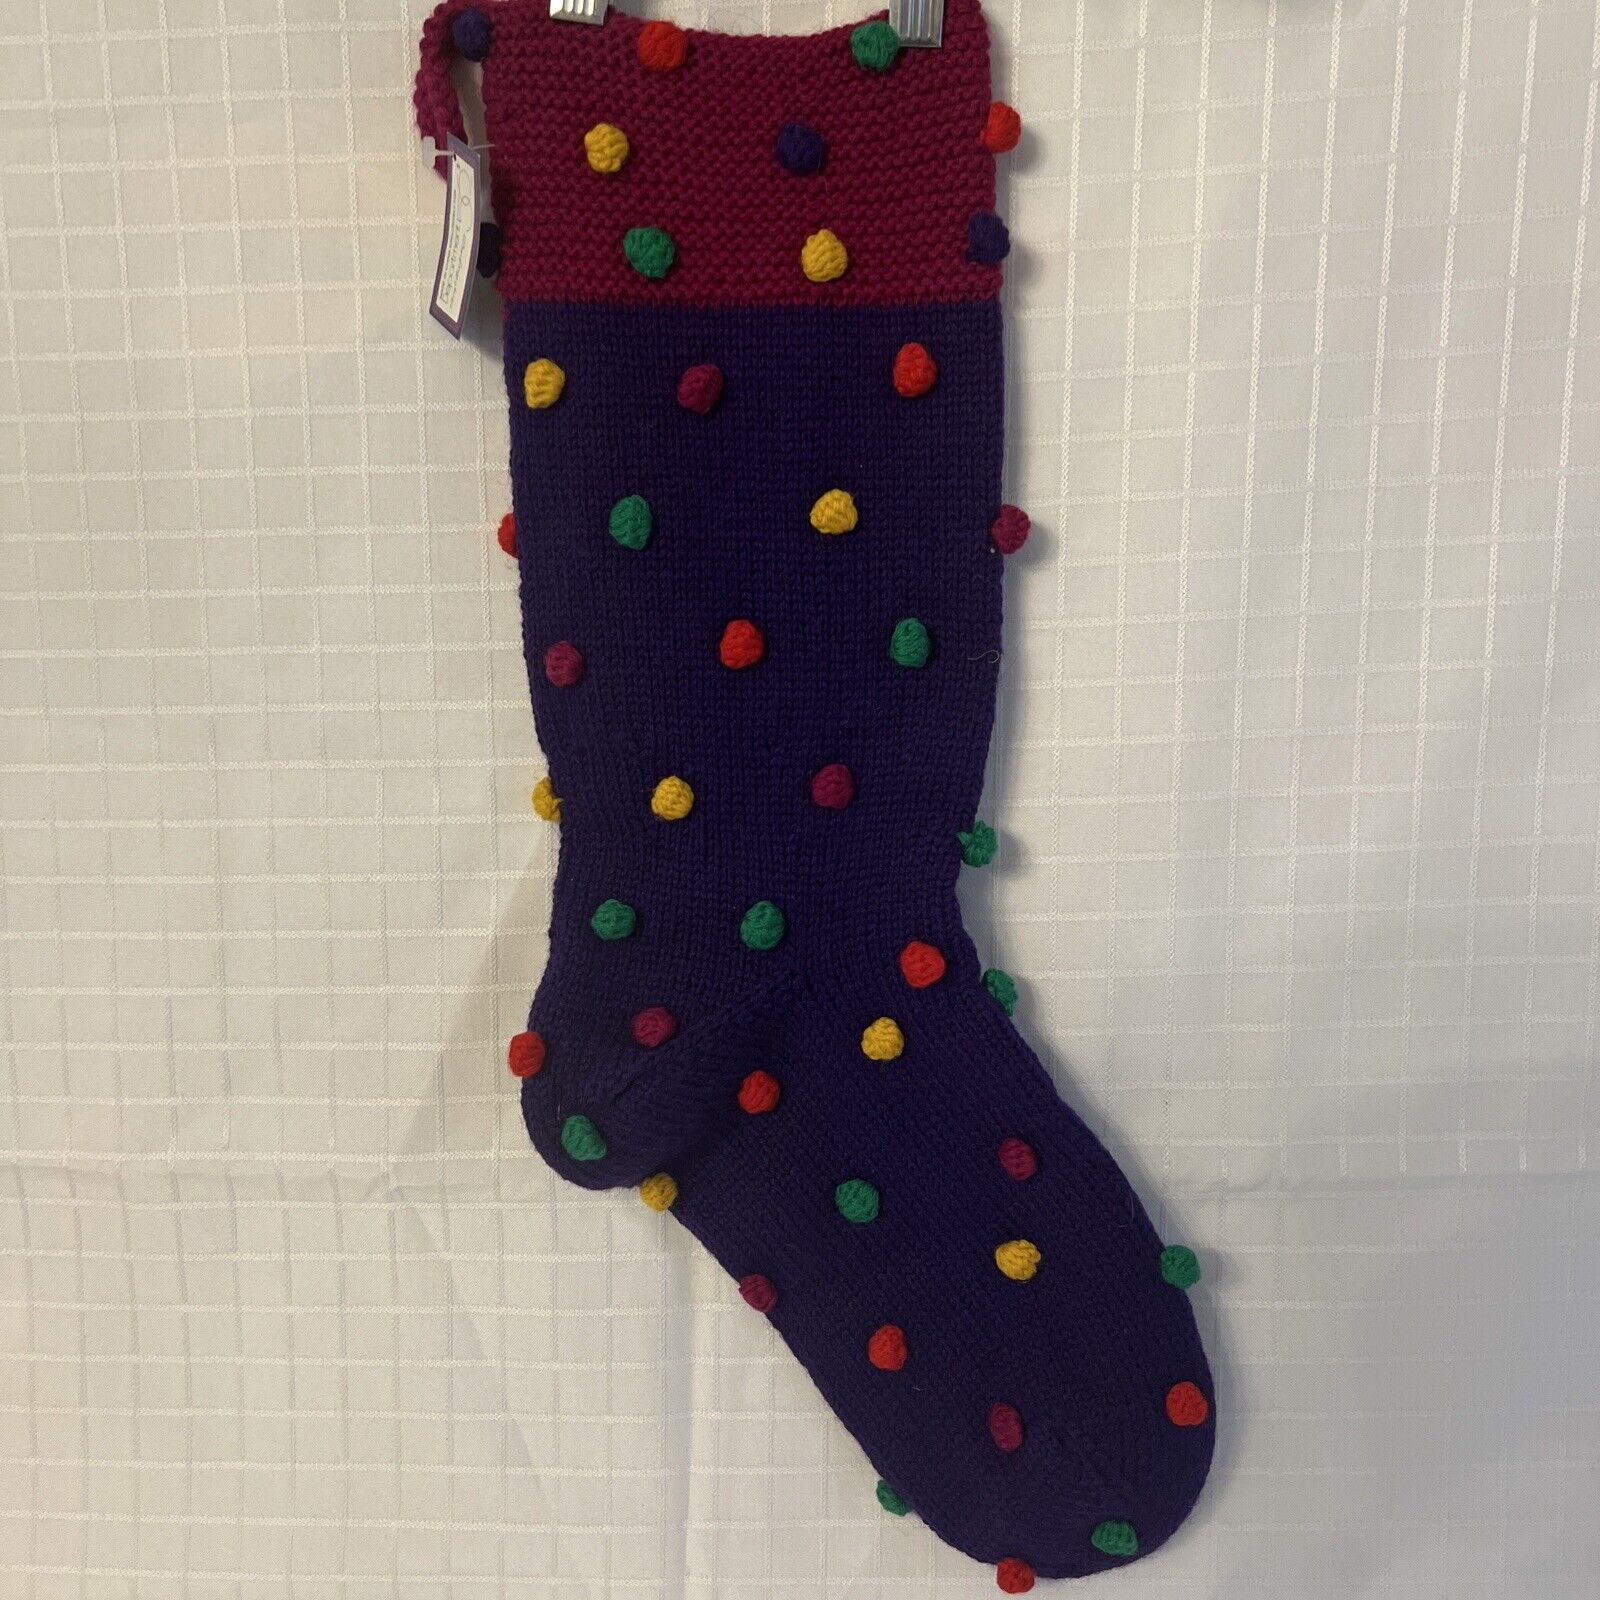 Winter Warm Ups Department 56 Multicolor Christmas Stocking Polka Dots Knitted